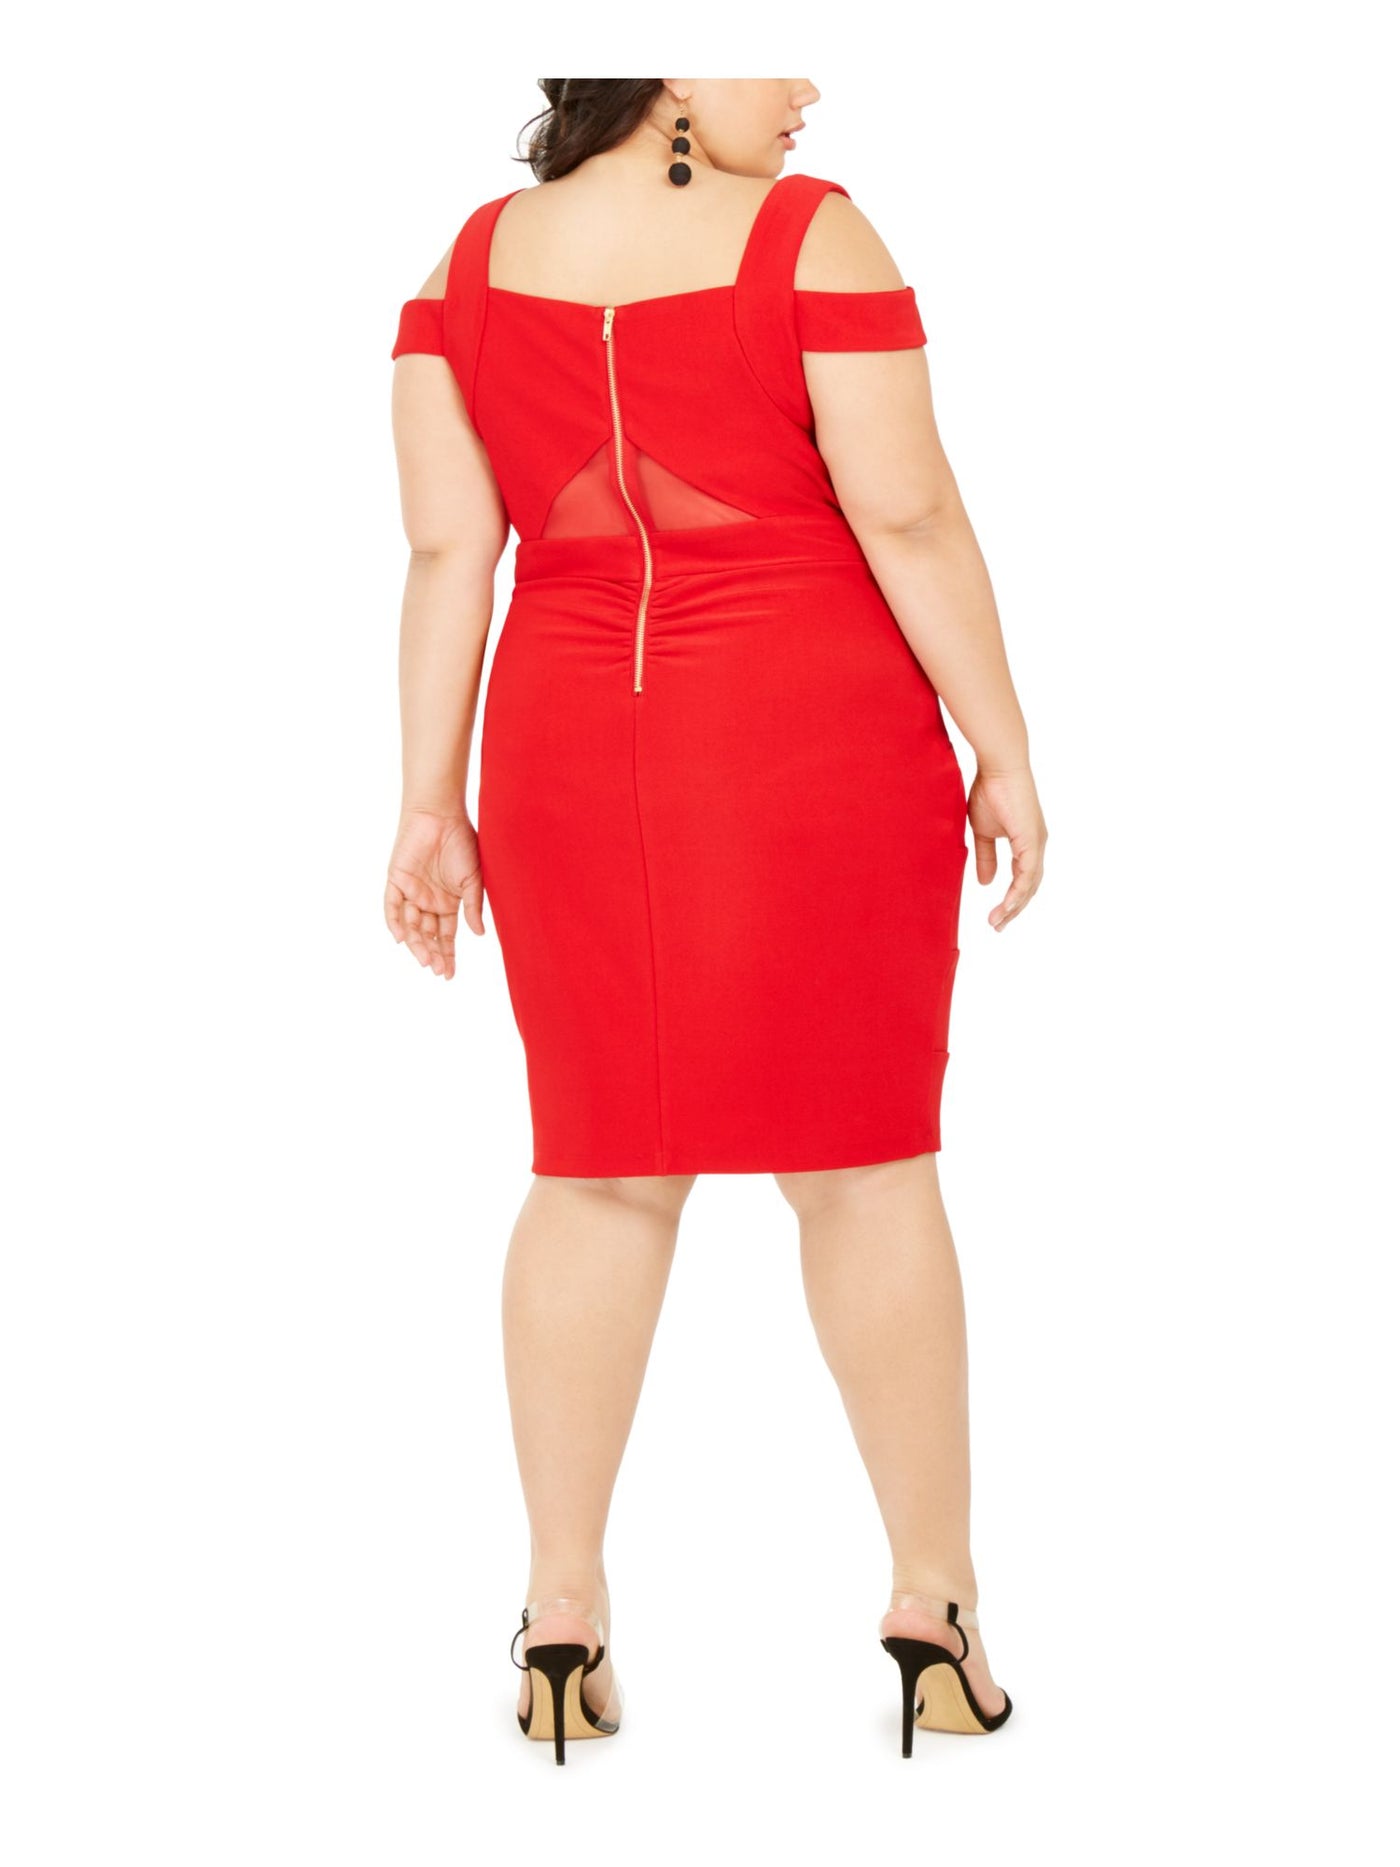 EMERALD SUNDAE Womens Red Cold Shoulder Cut Out Sleeveless Sweetheart Neckline Below The Knee Cocktail Body Con Dress Plus 1X